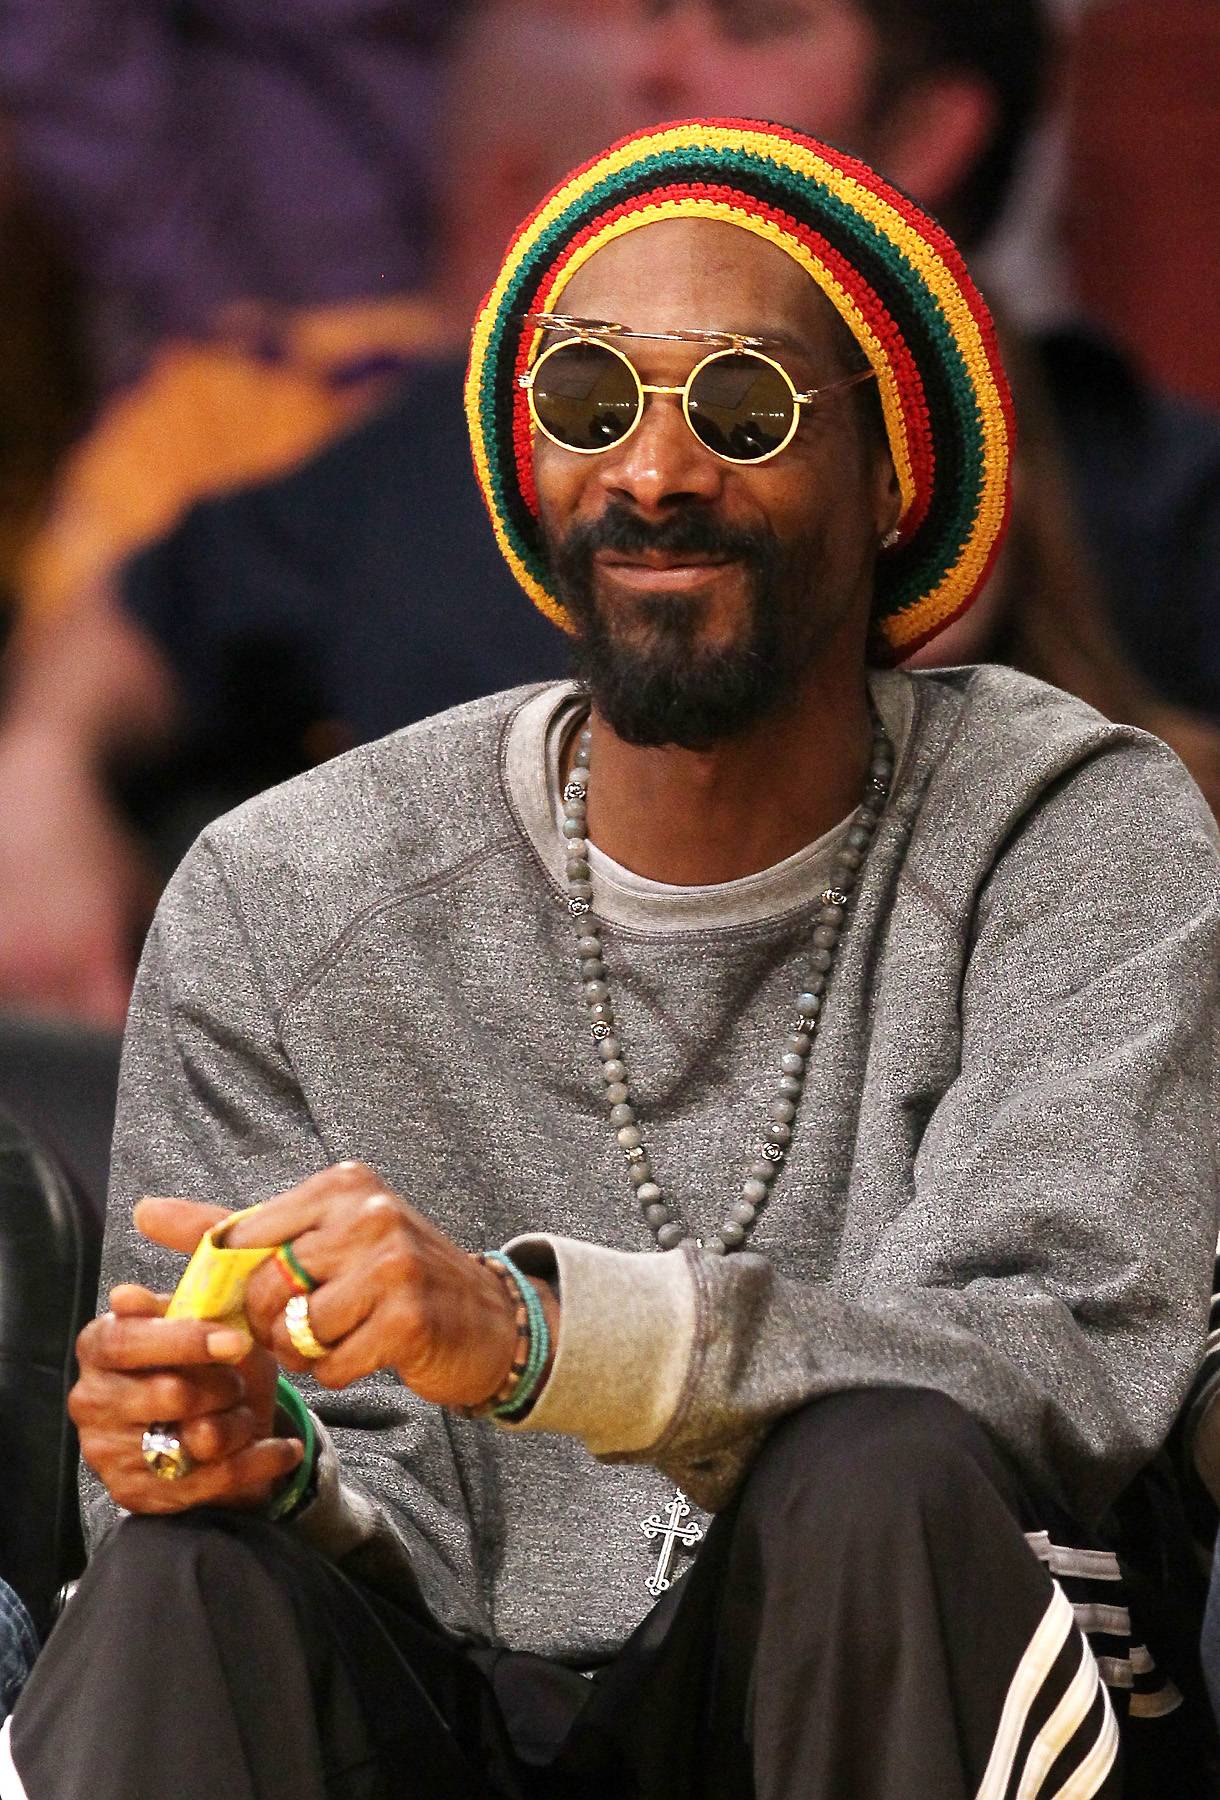 Snoop Dogg on The Voice:&nbsp; - &quot;You could have the best voice ever but be as boring as hell. I don't see it producing a One Direction or Susan Boyle.&quot;